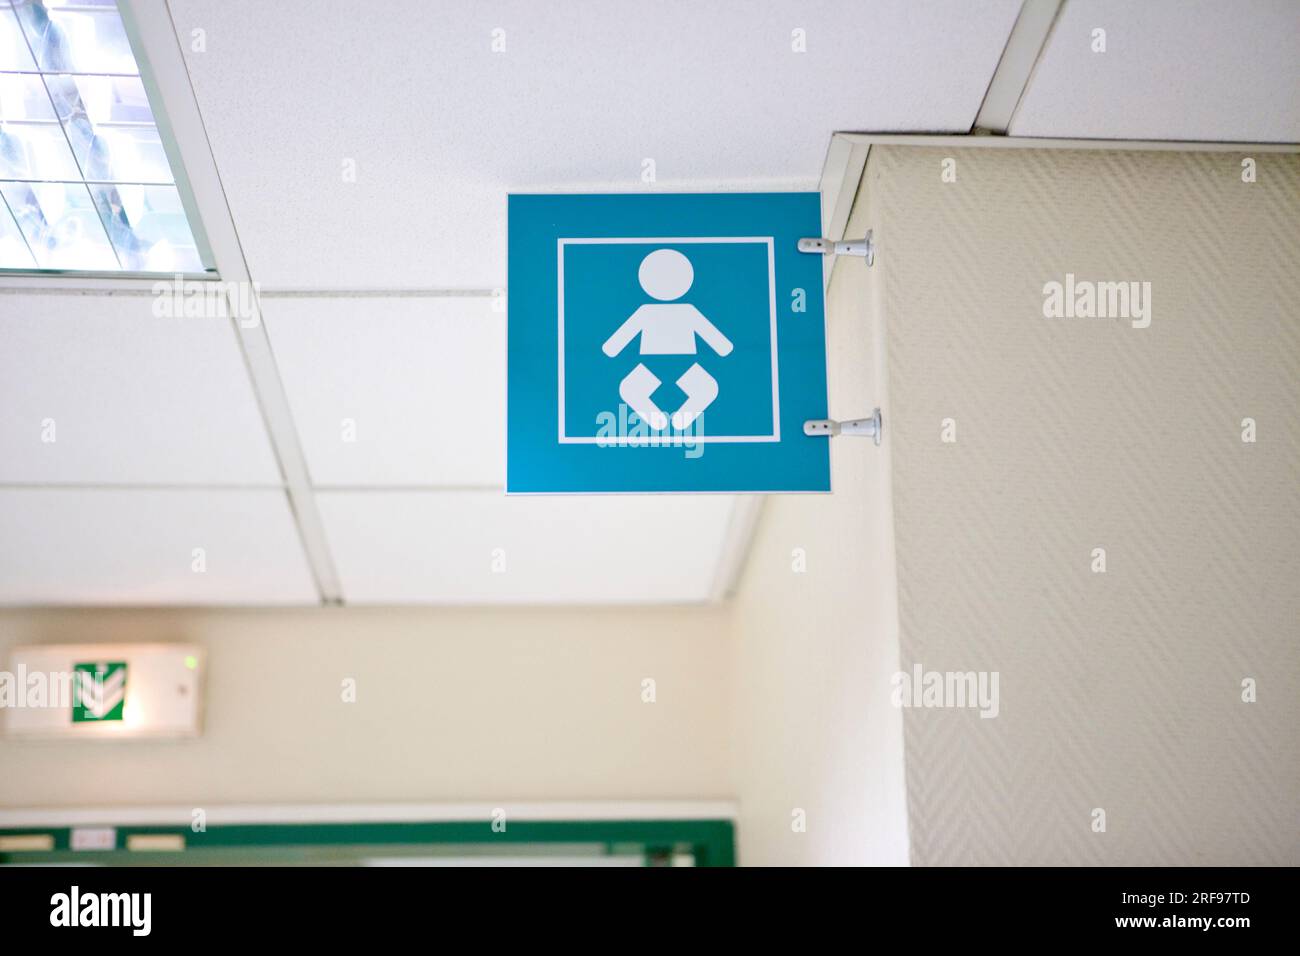 Signage in the maternity ward of a hospital. Stock Photo